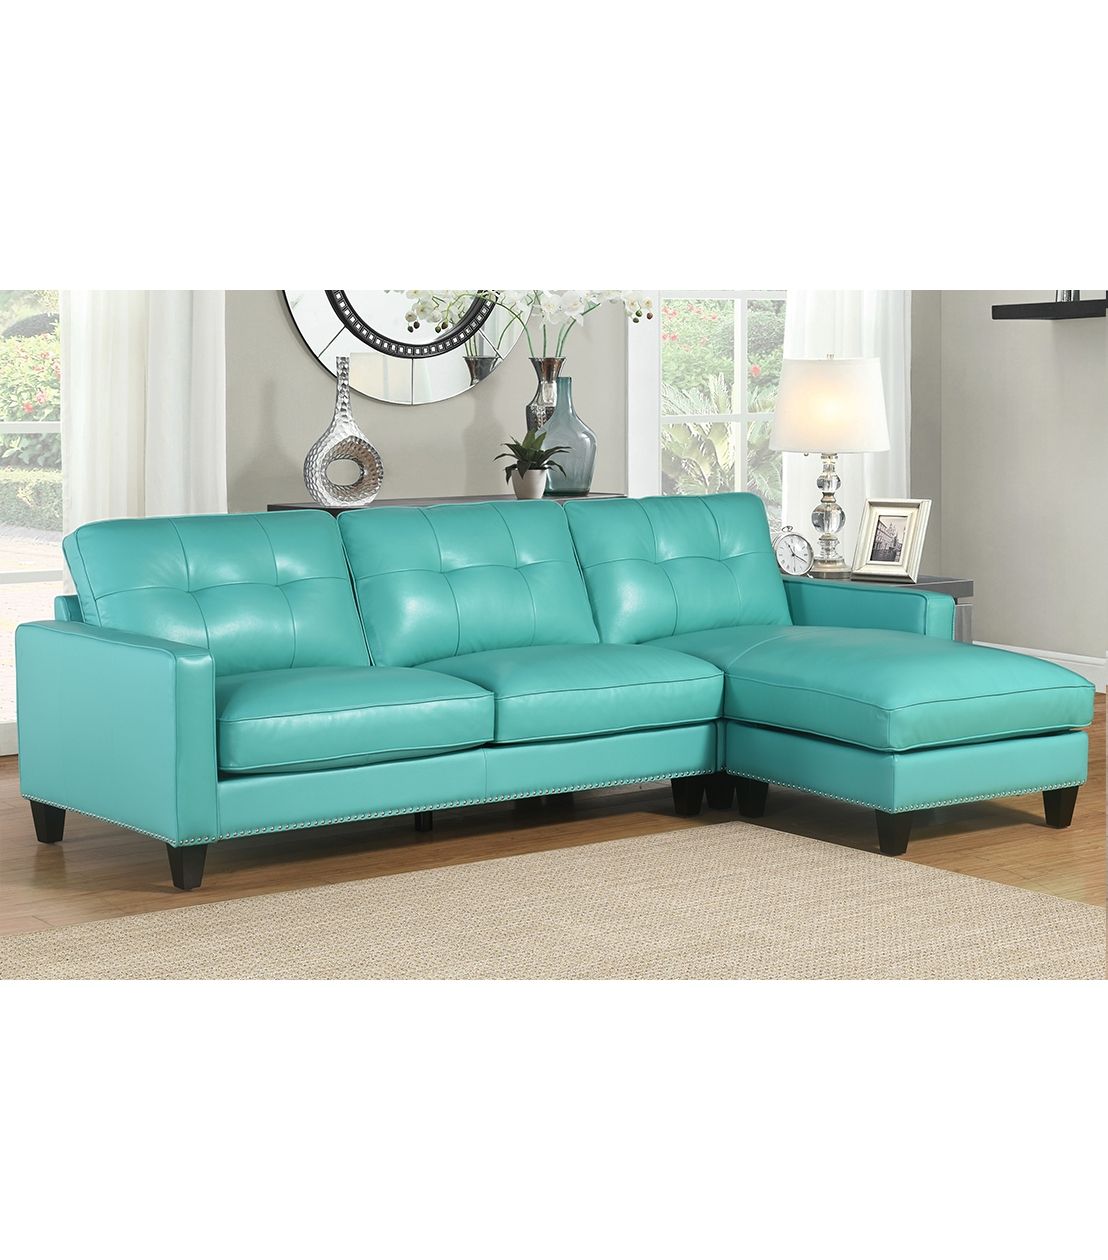 Sectionals Metropolitan Leather Sectional Intended For Abbyson Sectional Sofa (View 4 of 12)